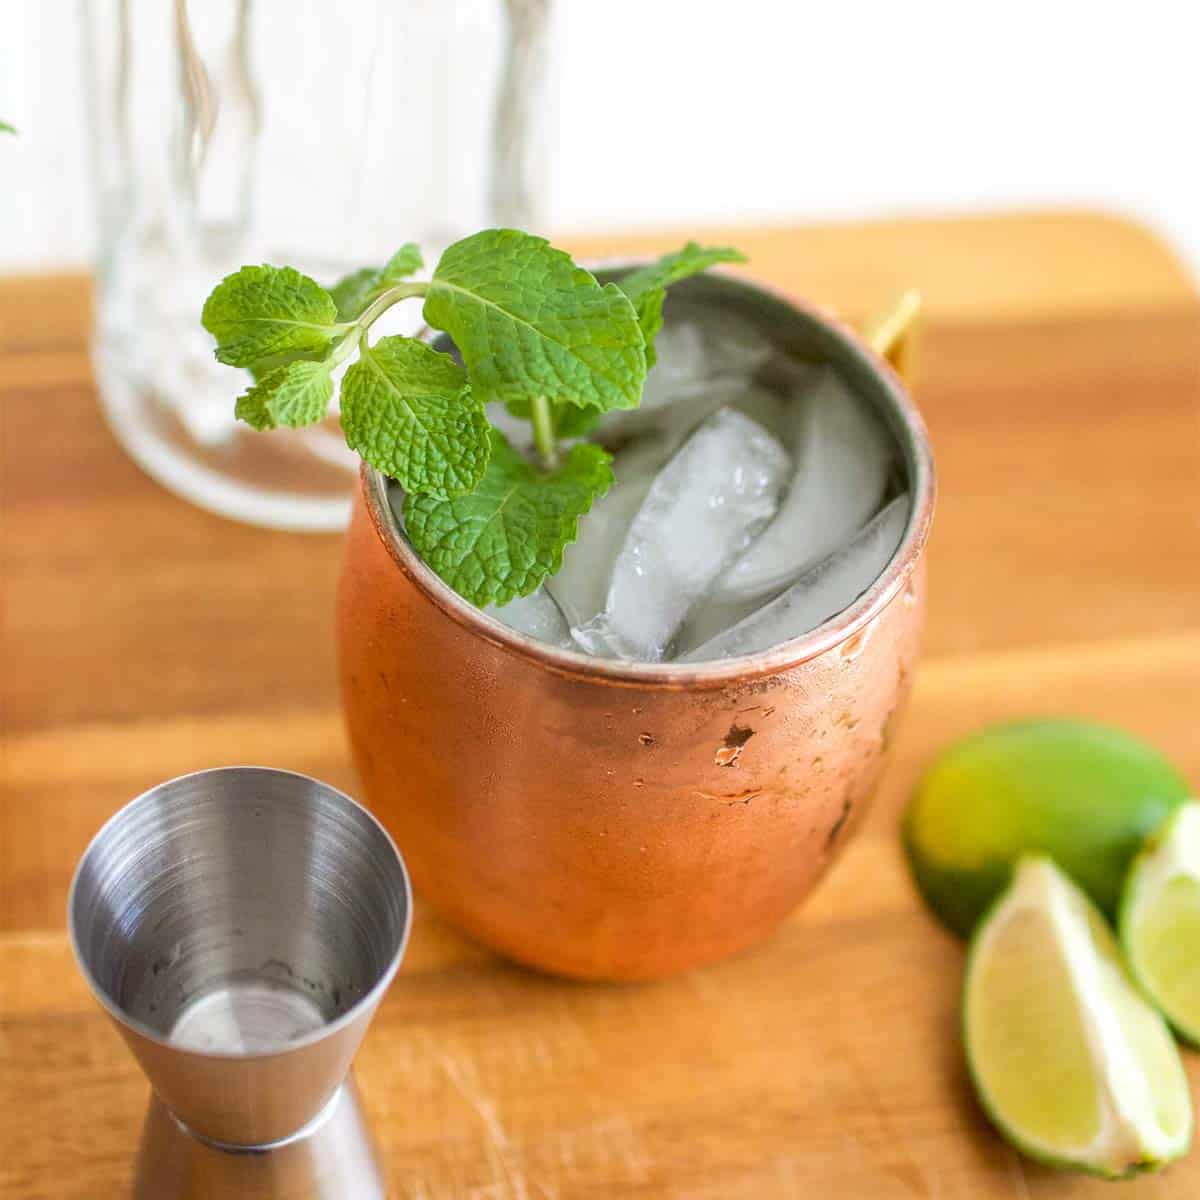 https://www.cupcakesandcutlery.com/wp-content/uploads/2021/06/best-moscow-mule-recipe-featured-image.jpg